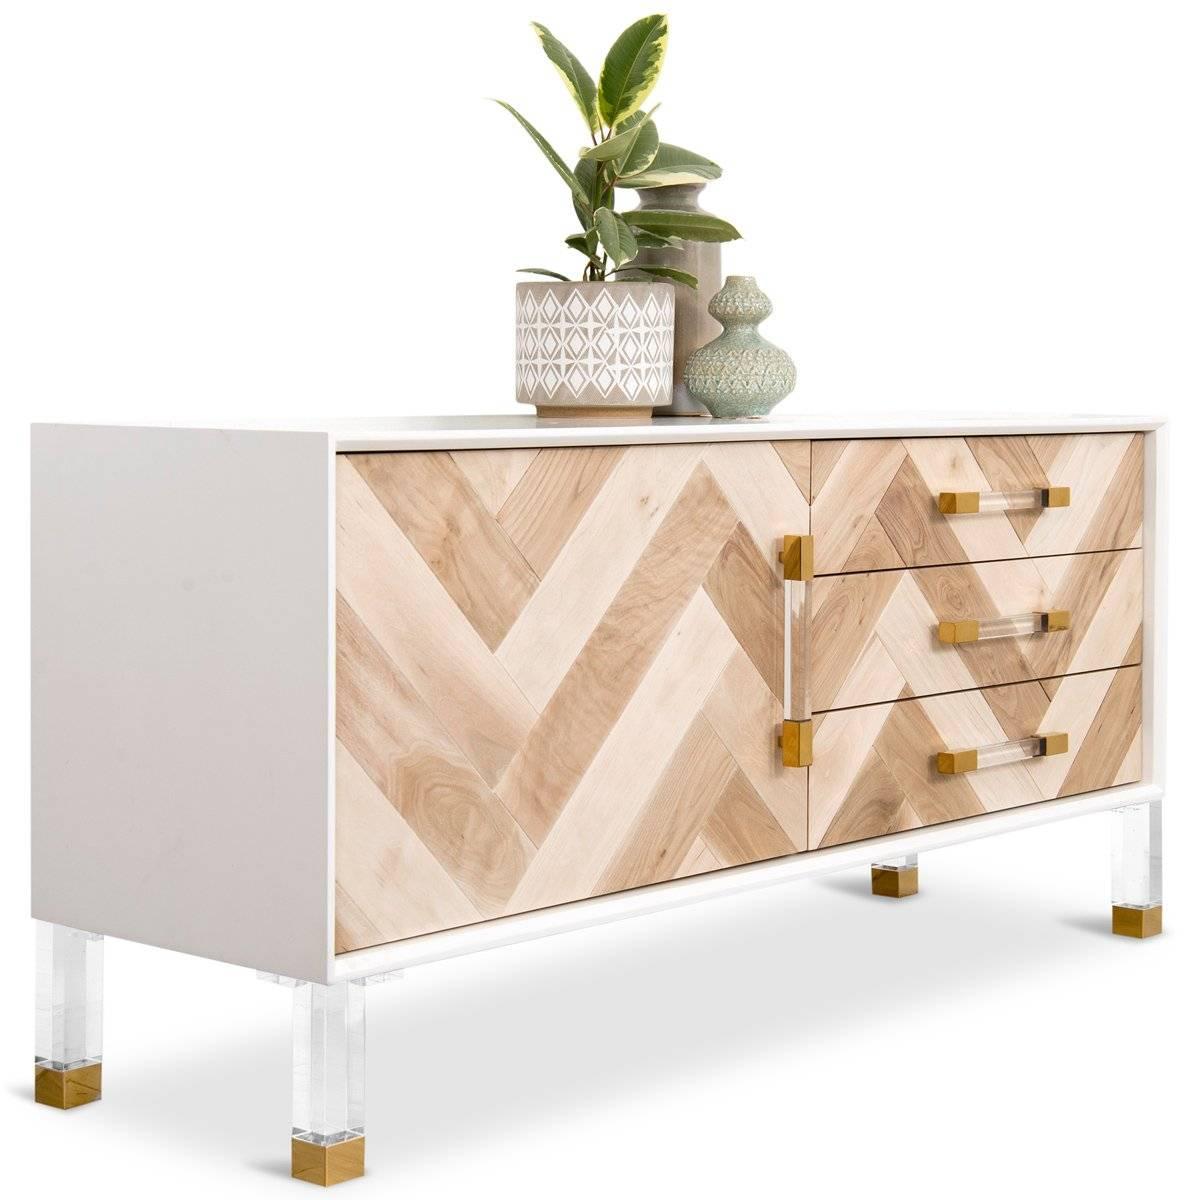 The Corfu one door three-drawer credenza is perfect for any spaces, with its walnut door face. This one here comes with a white case finish, brass and Lucite legs and the wood pieces placed on the doors create a large herringbone effect.